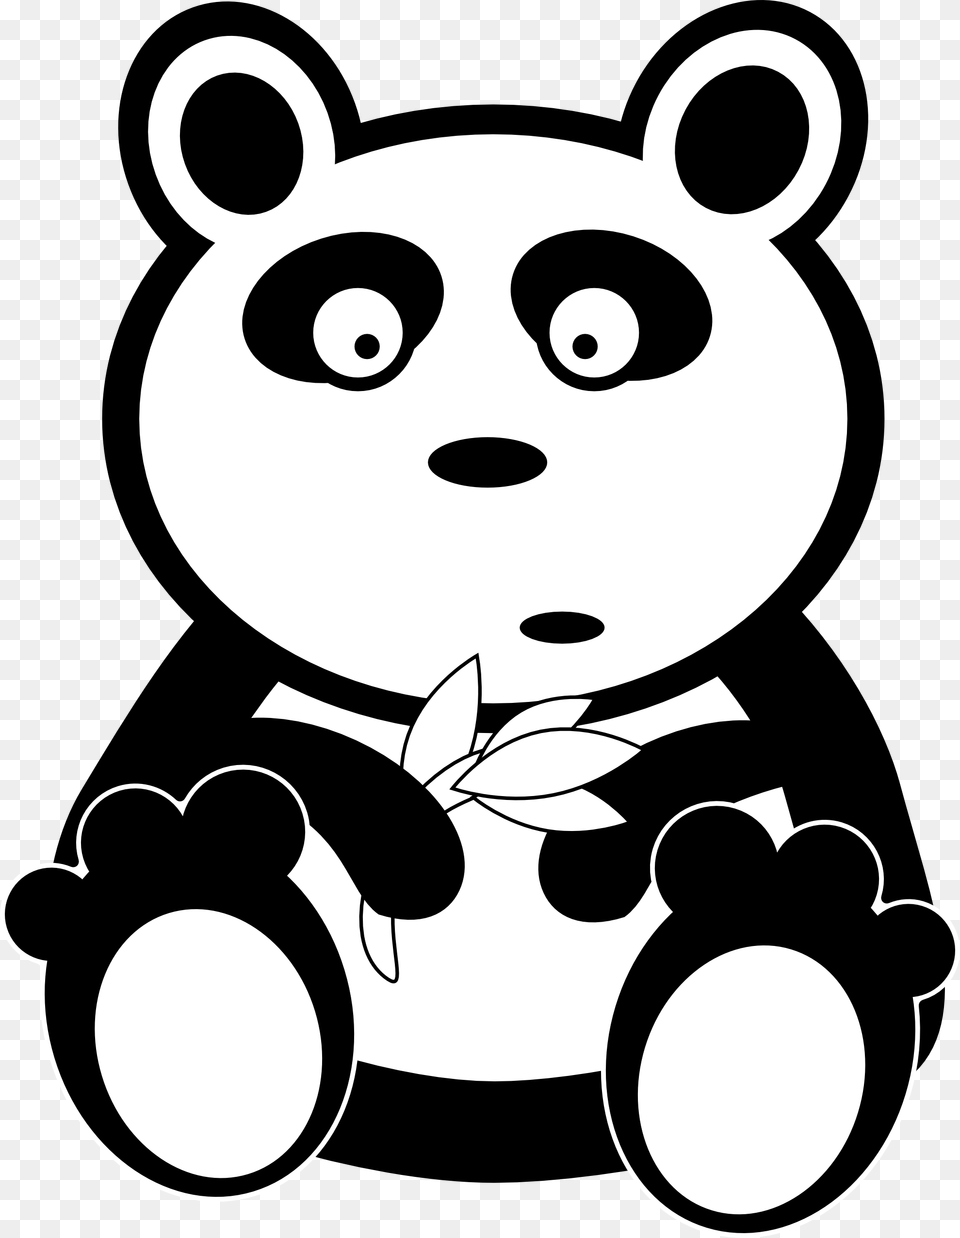 Collection Of Panda Clipart Black And White Panda Clipart Black And White, Stencil, Toy, Nature, Outdoors Free Transparent Png